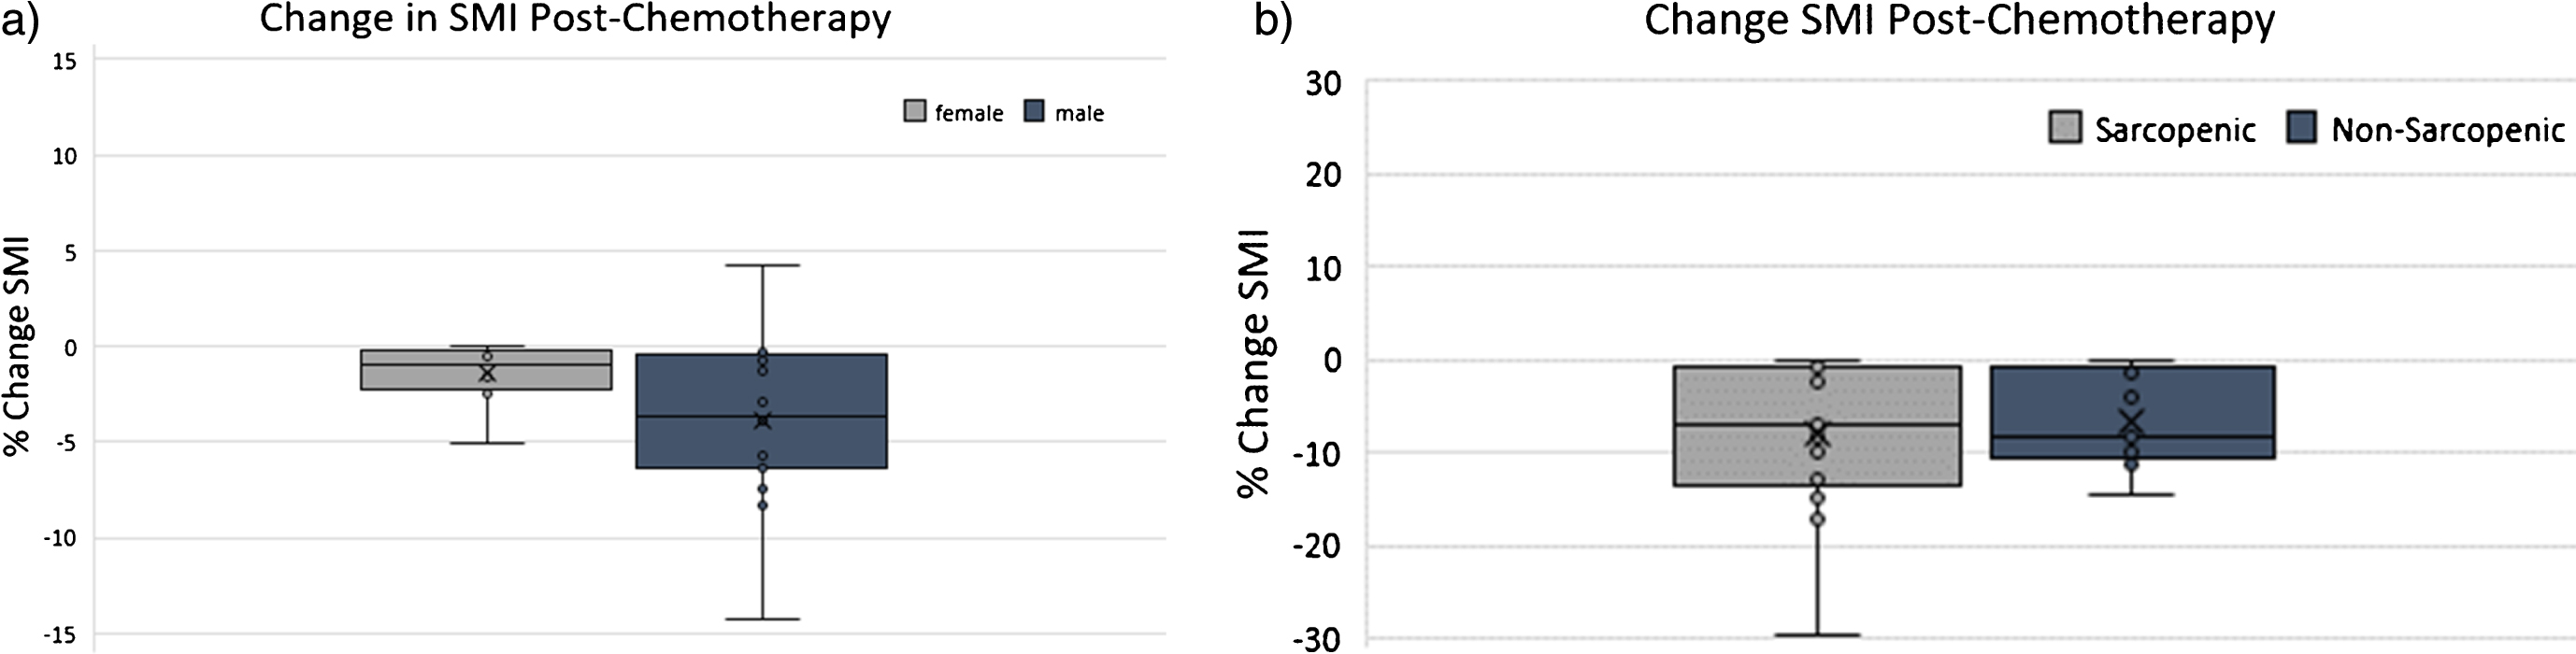 Percent Change in skeletal muscle index (SMI) following neoadjuvant chemotherapy (NAC) according to (a) sex and (b) sarcopenia status pre-NAC.